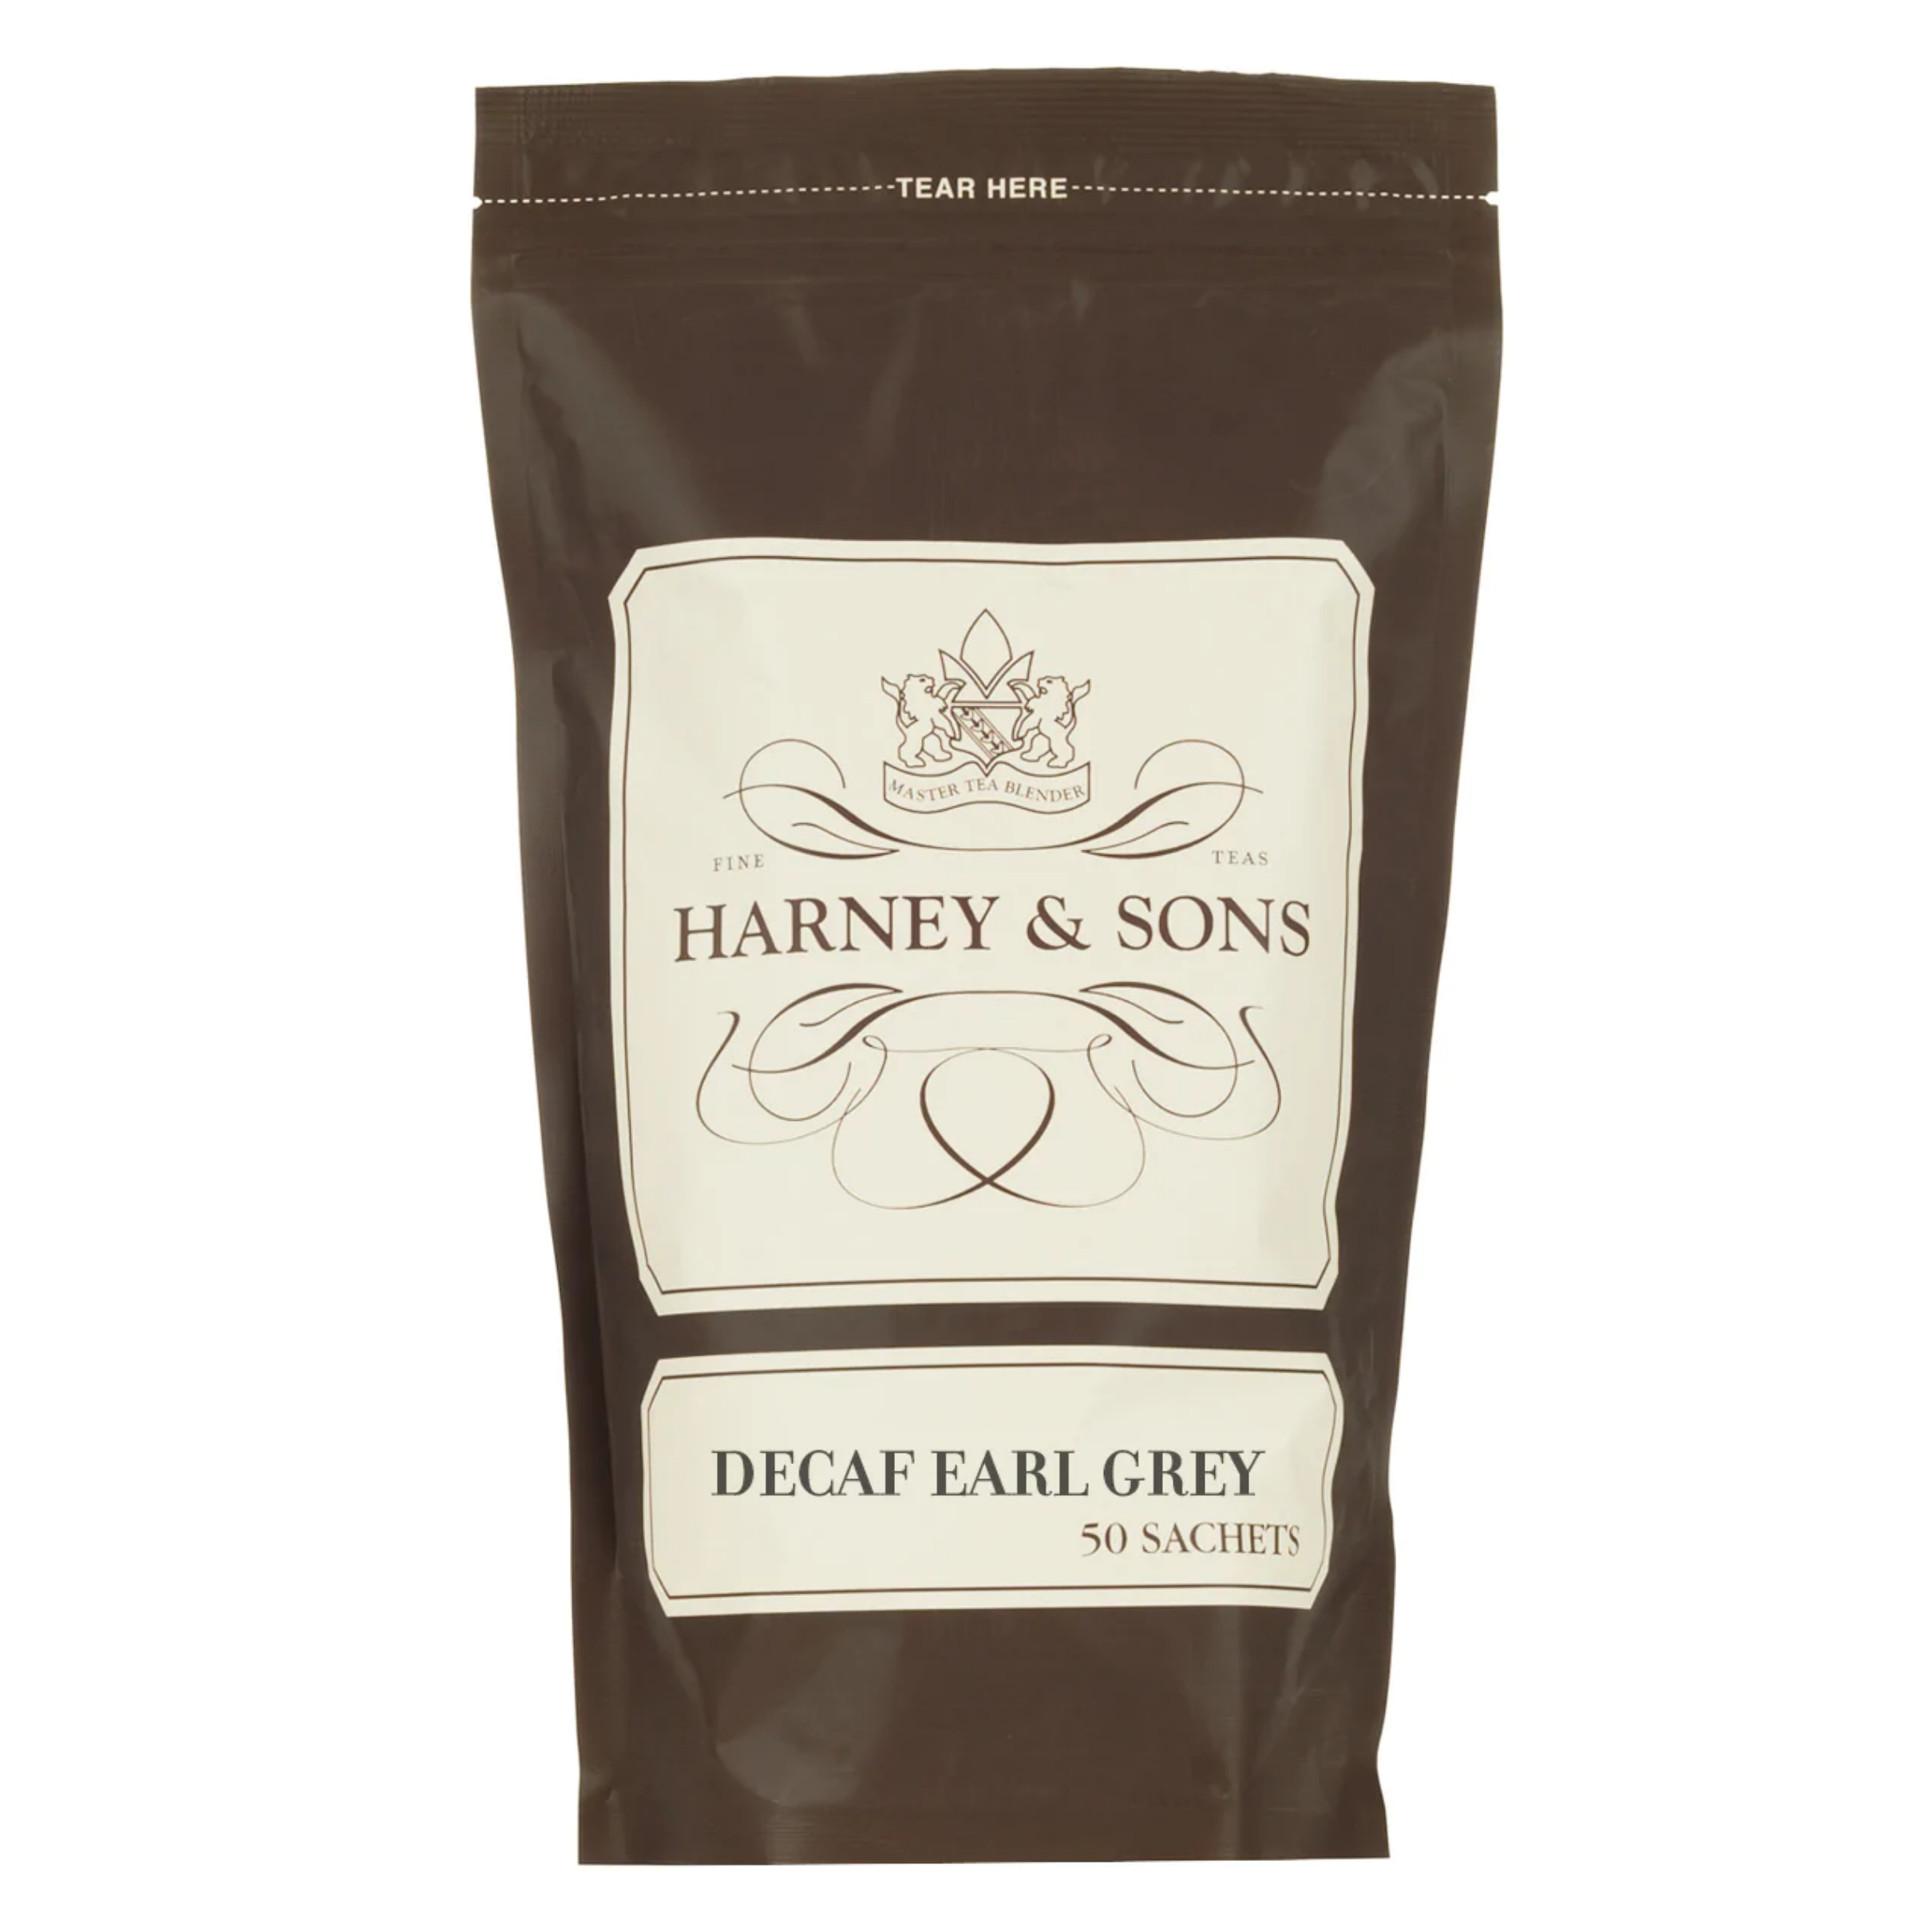 Bags of 50 – HARNEY & SONS JAPAN